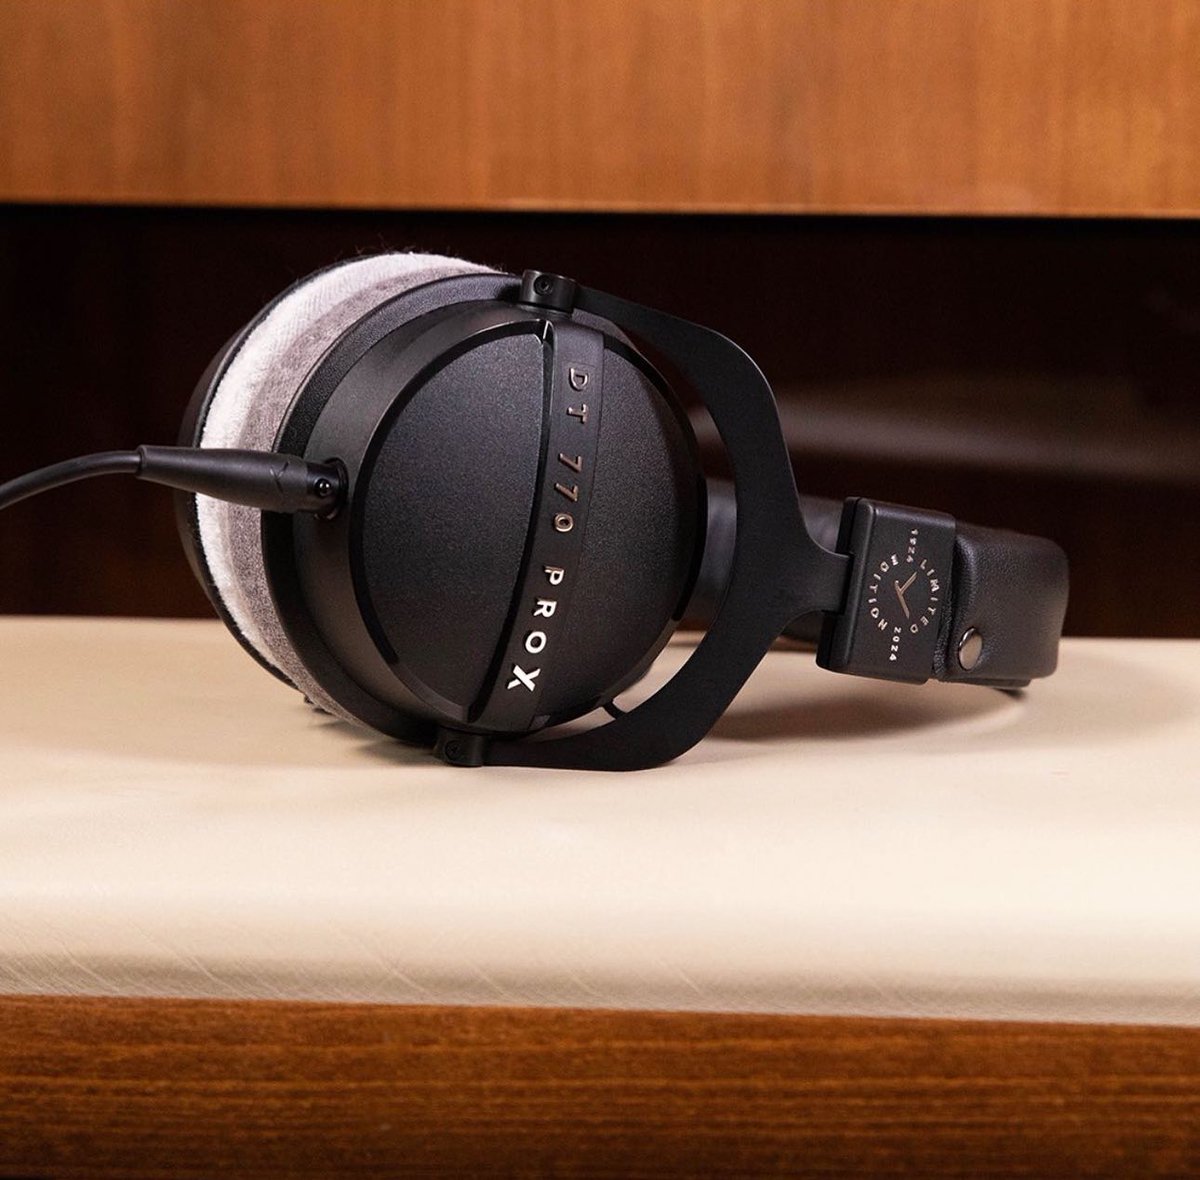 New Headphone Alert! The DT 770 PRO X is now available. bit.ly/3SDpBAd